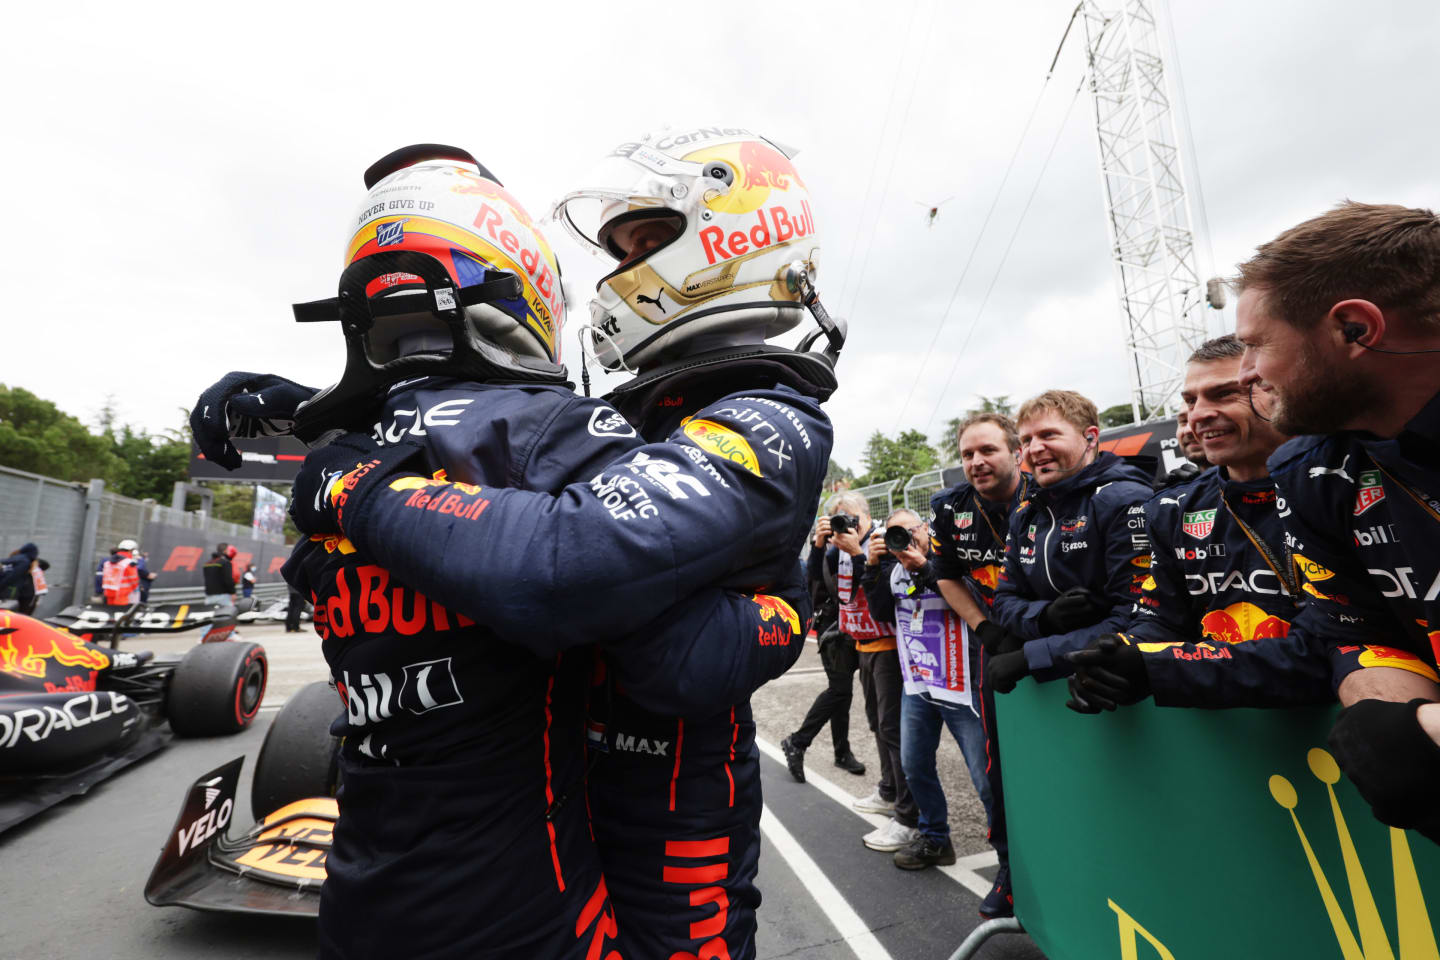 IMOLA, ITALY - APRIL 24: Race winner Max Verstappen of the Netherlands and Oracle Red Bull Racing and Second placed Sergio Perez of Mexico and Oracle Red Bull Racing celebrate in parc ferme during the F1 Grand Prix of Emilia Romagna at Autodromo Enzo e Dino Ferrari on April 24, 2022 in Imola, Italy. (Photo by Mark Thompson/Getty Images)